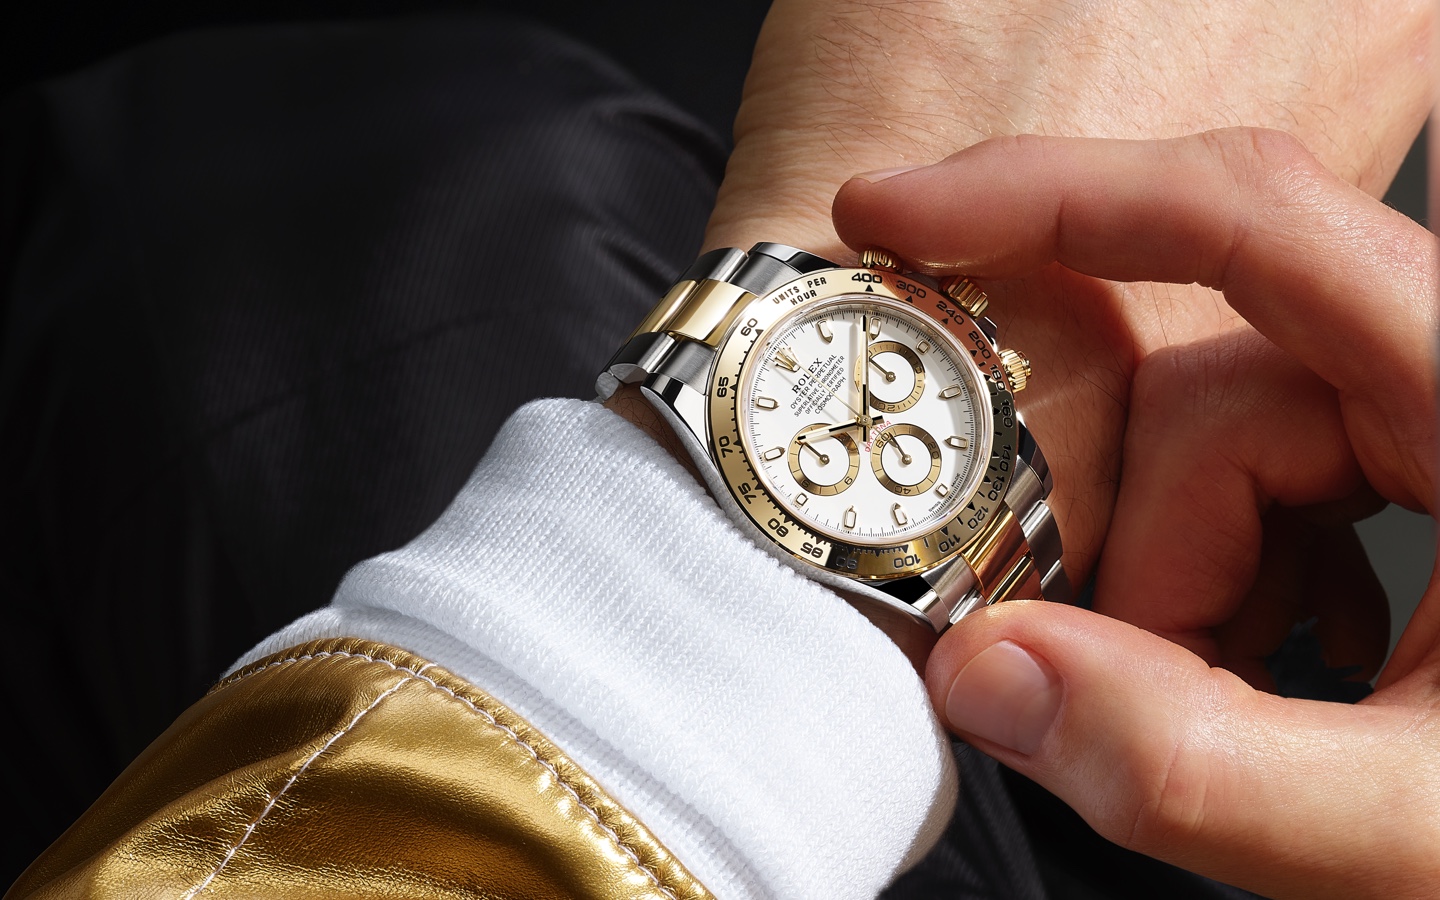 Rolex Oyster Perpetual Cosmograph Daytona watch at Goldfinger SXM - Caribbean